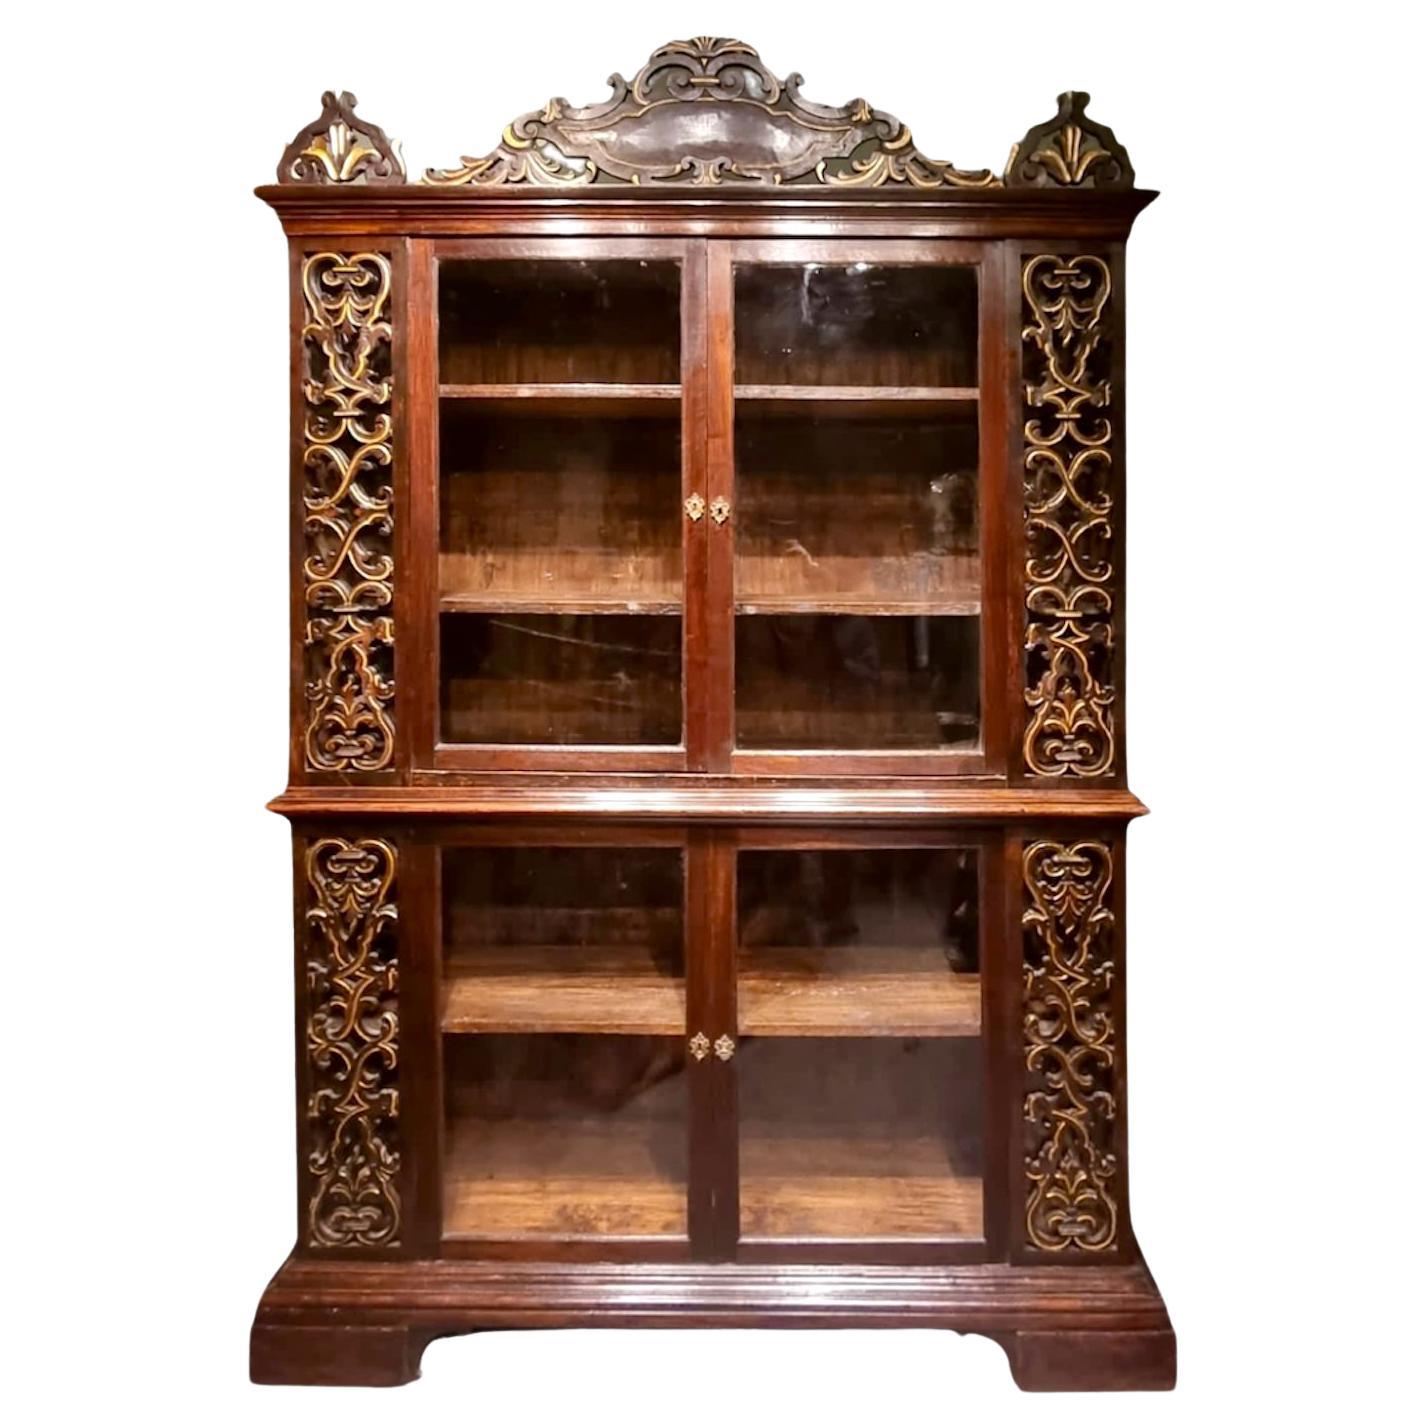 Bookcase dating back to the late 18th century